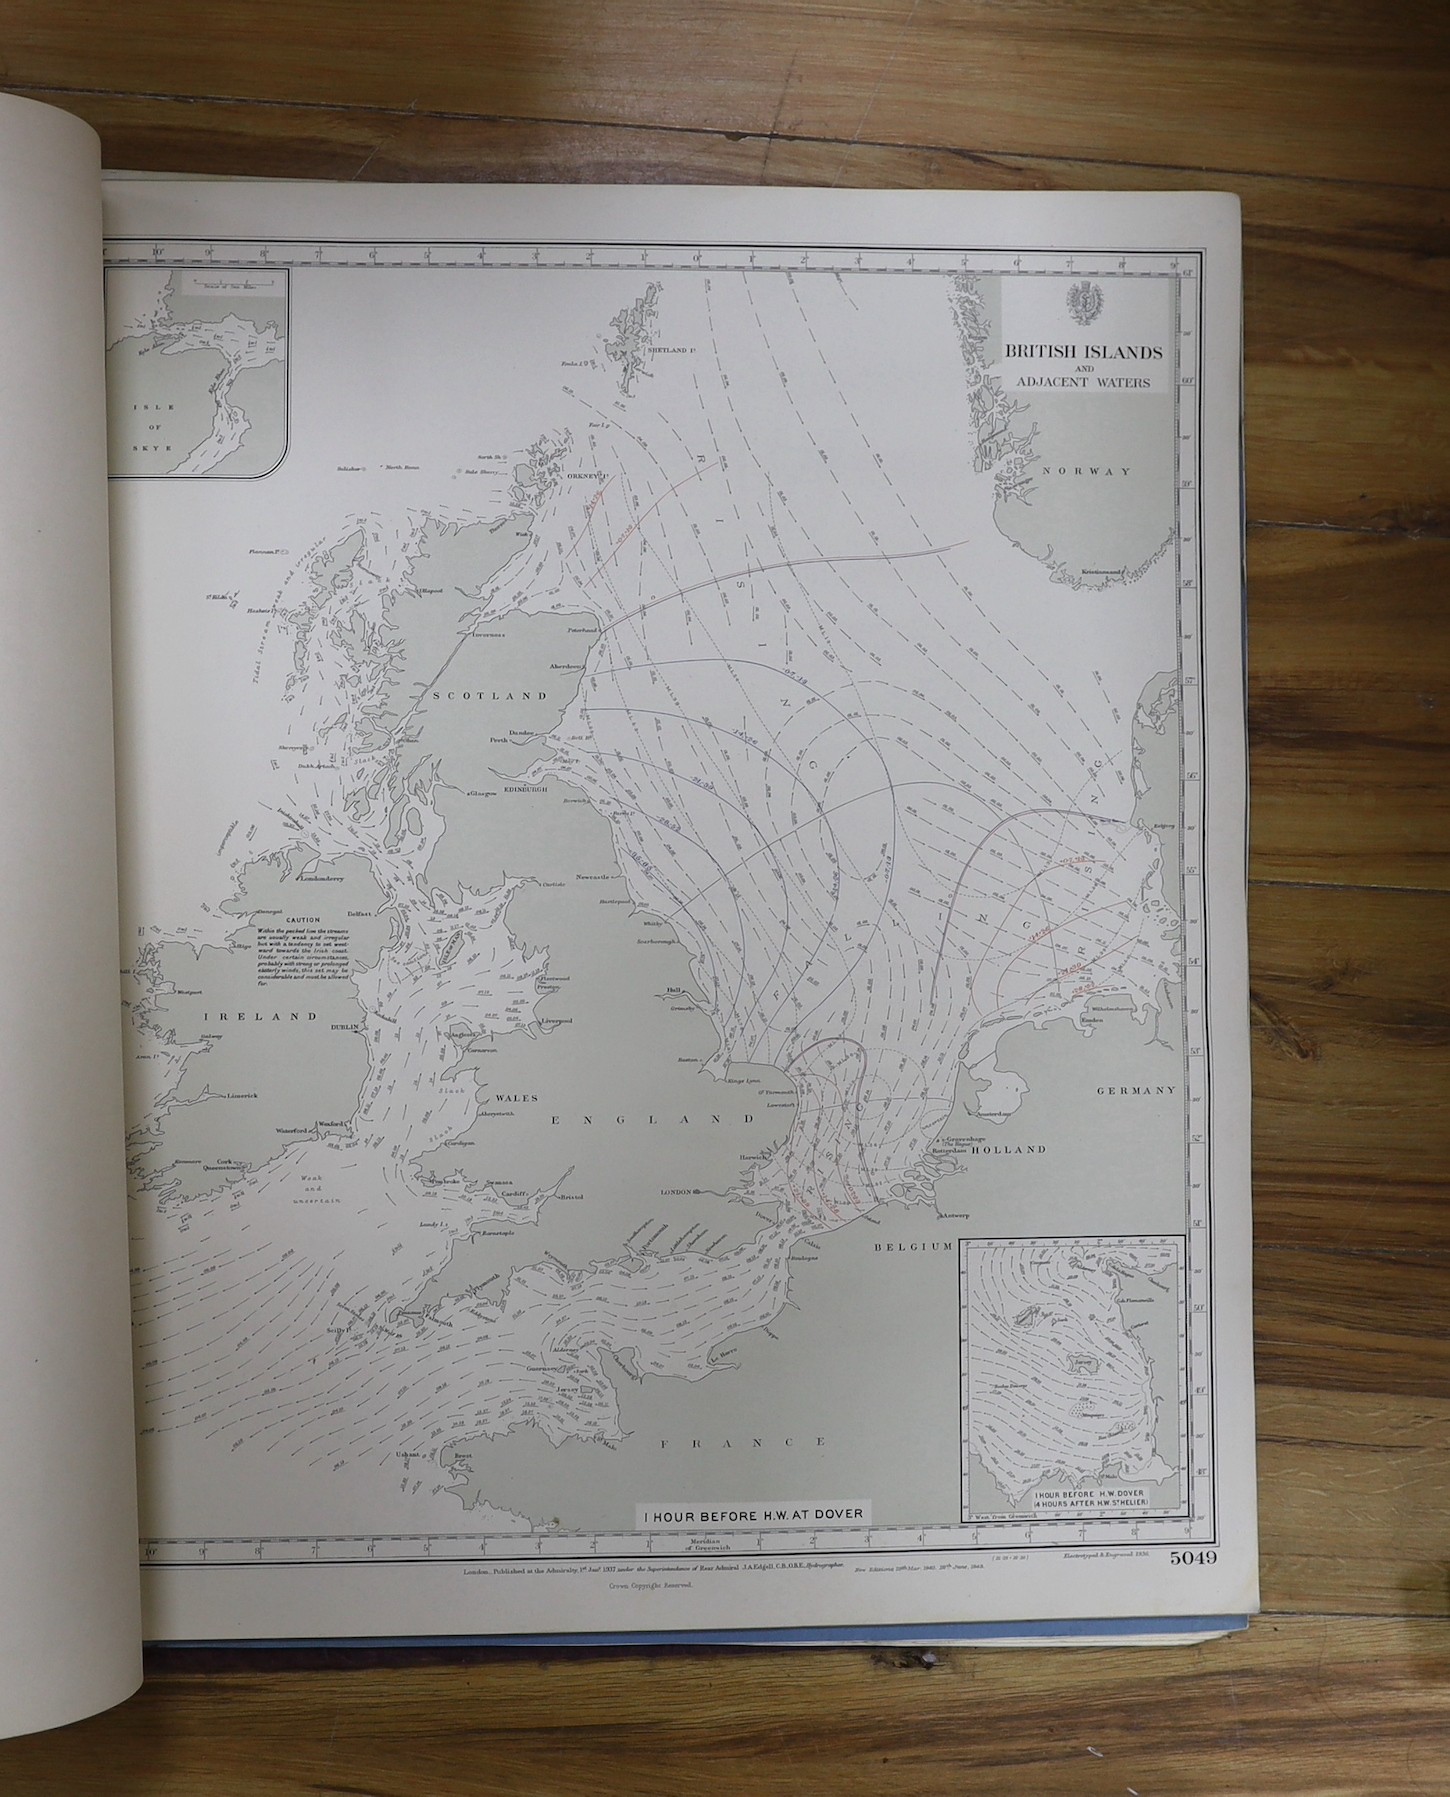 Three atlases of tidal streams British islands and adjacent waters